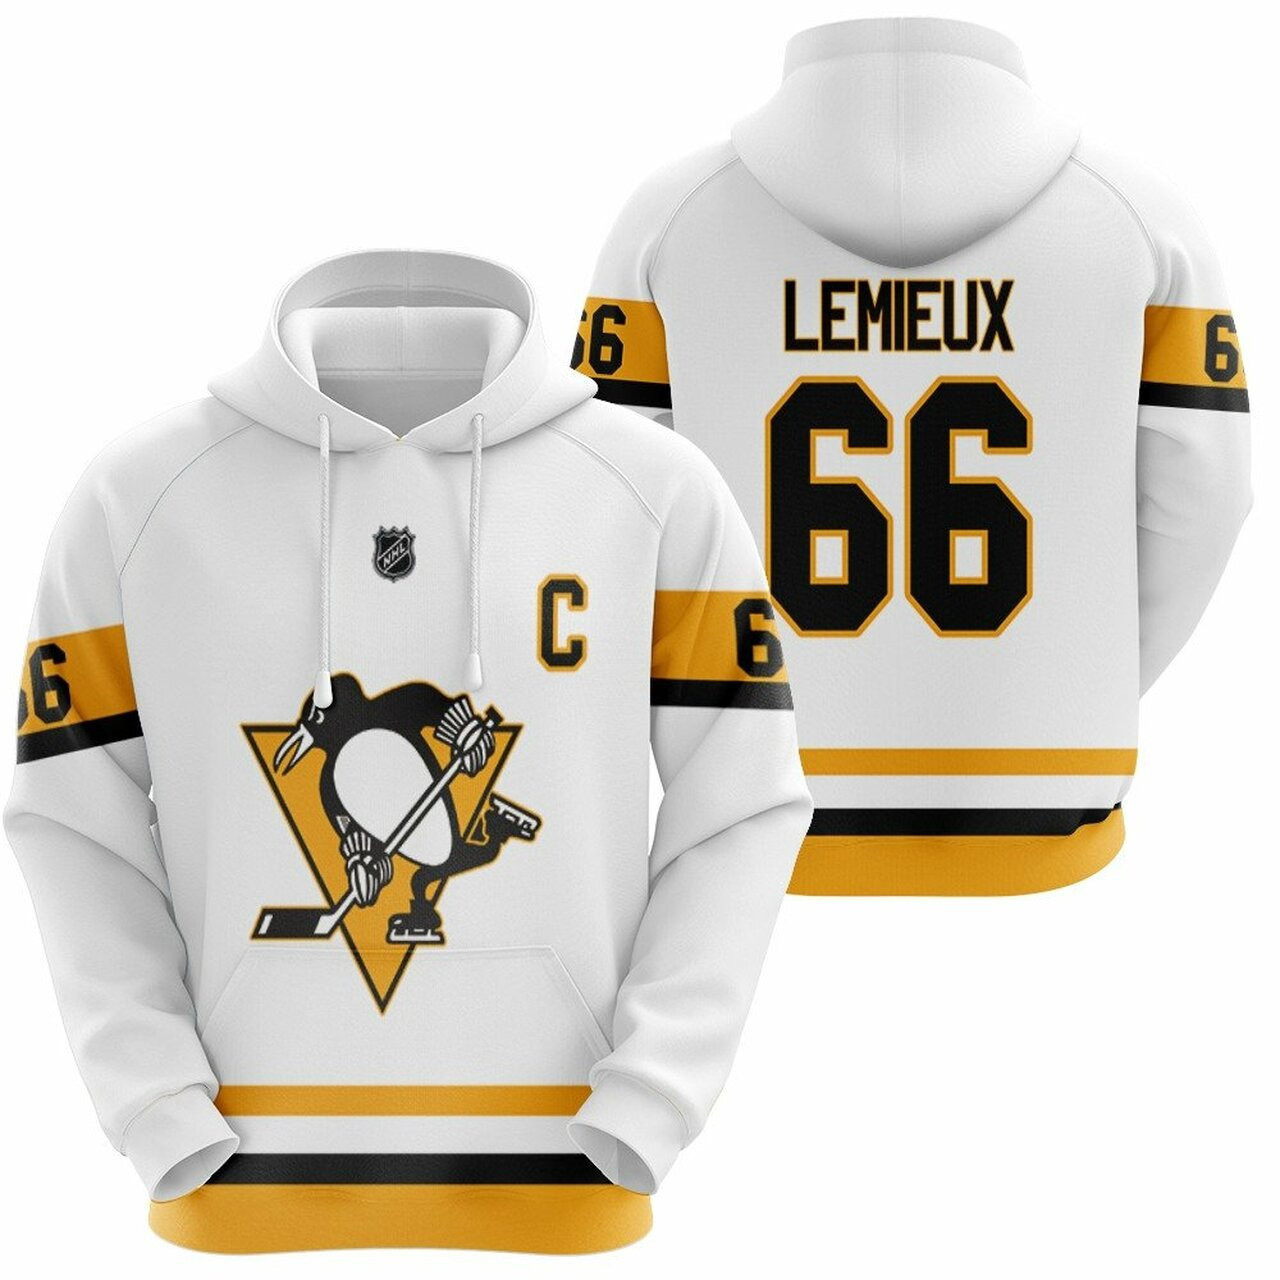 Pittsburgh Penguins Mario Lemieux 66 Nhl Ice Hockey Team 2020 White Jersey Style Gift For Penguins Fans Hoodie